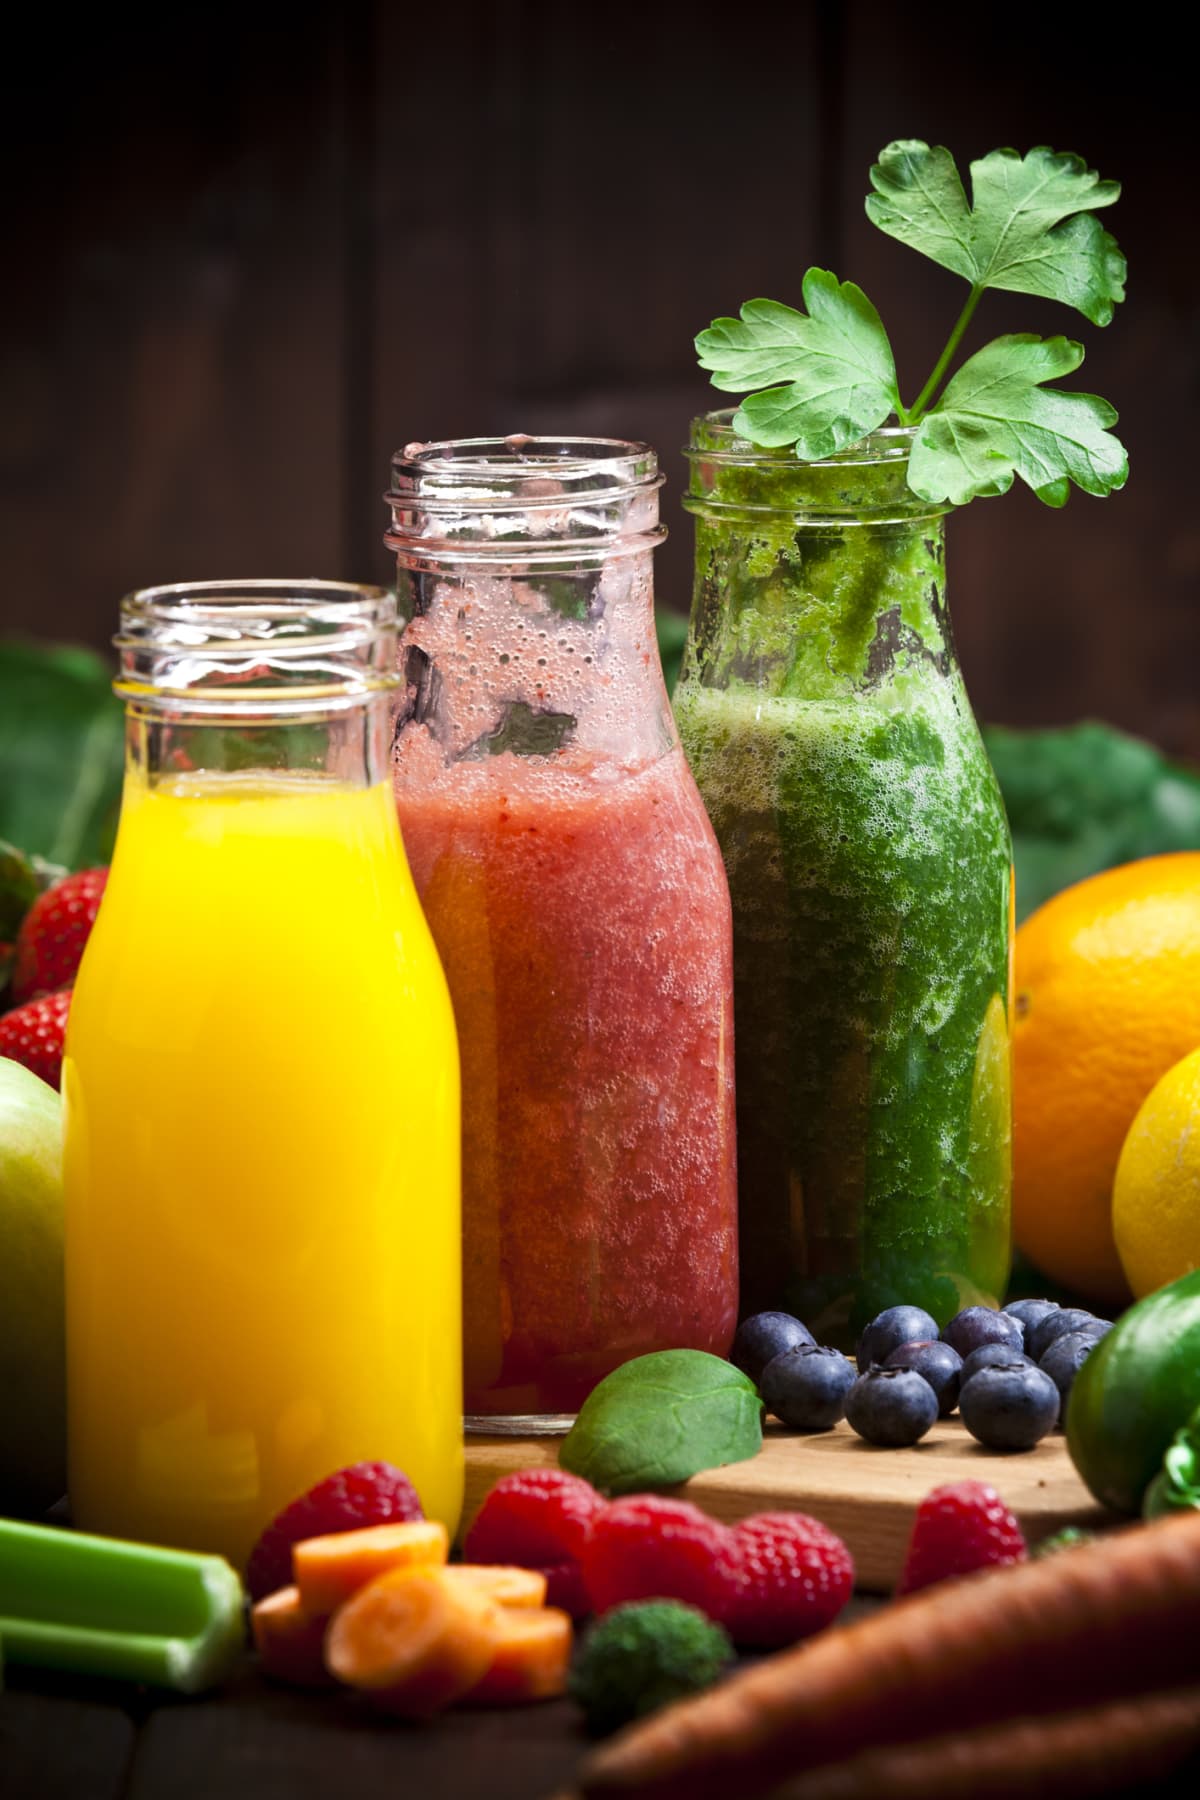 Green red and orange produce juices in glass bottles